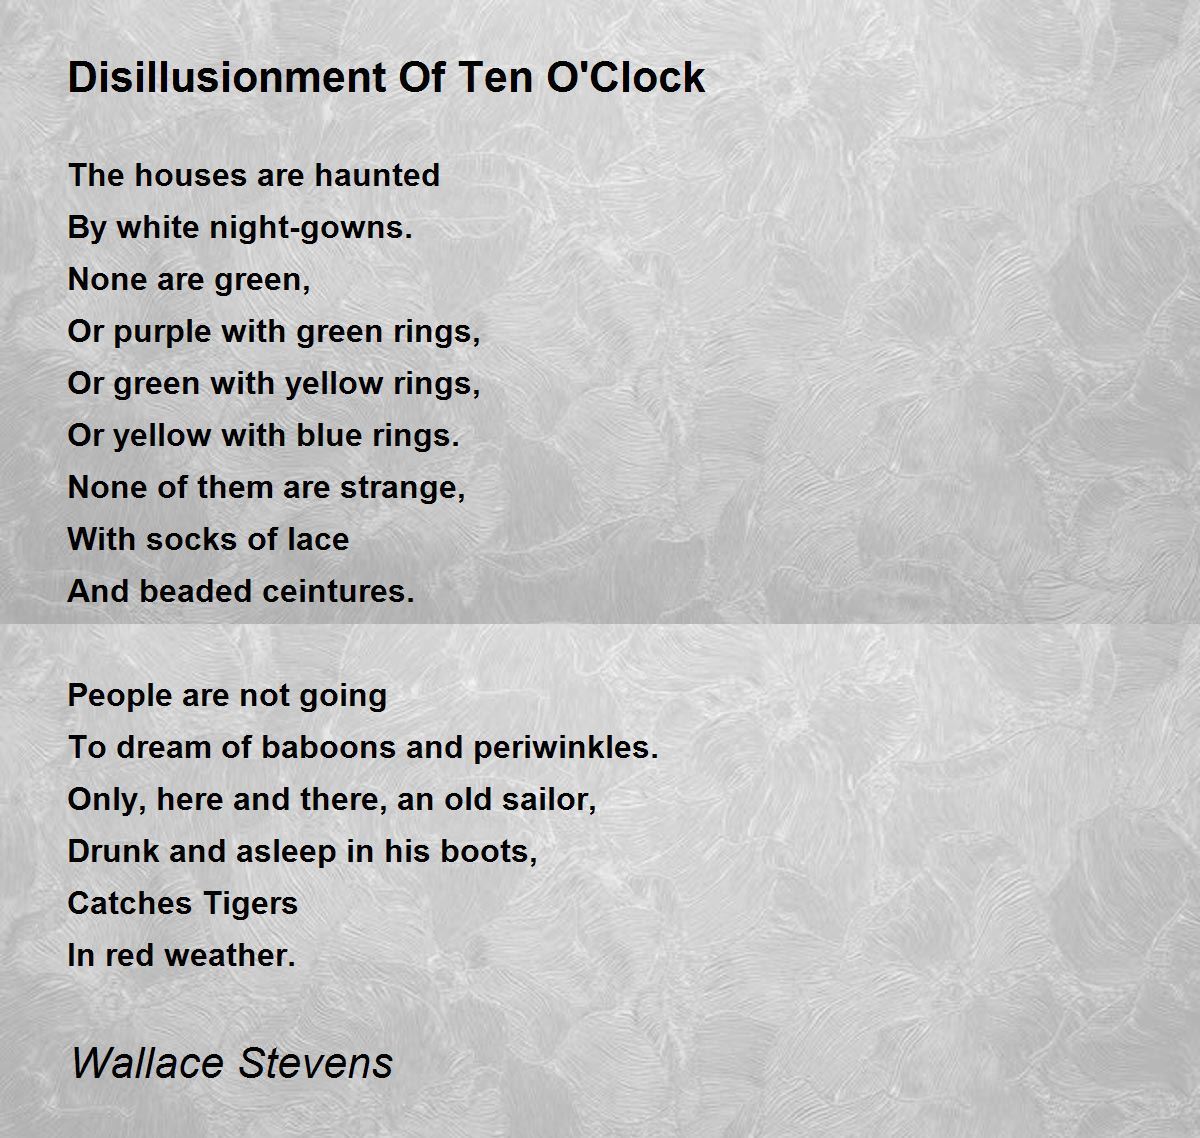 Disillusionment Of Ten O'Clock - Disillusionment Of Ten O'Clock Poem by  Wallace Stevens